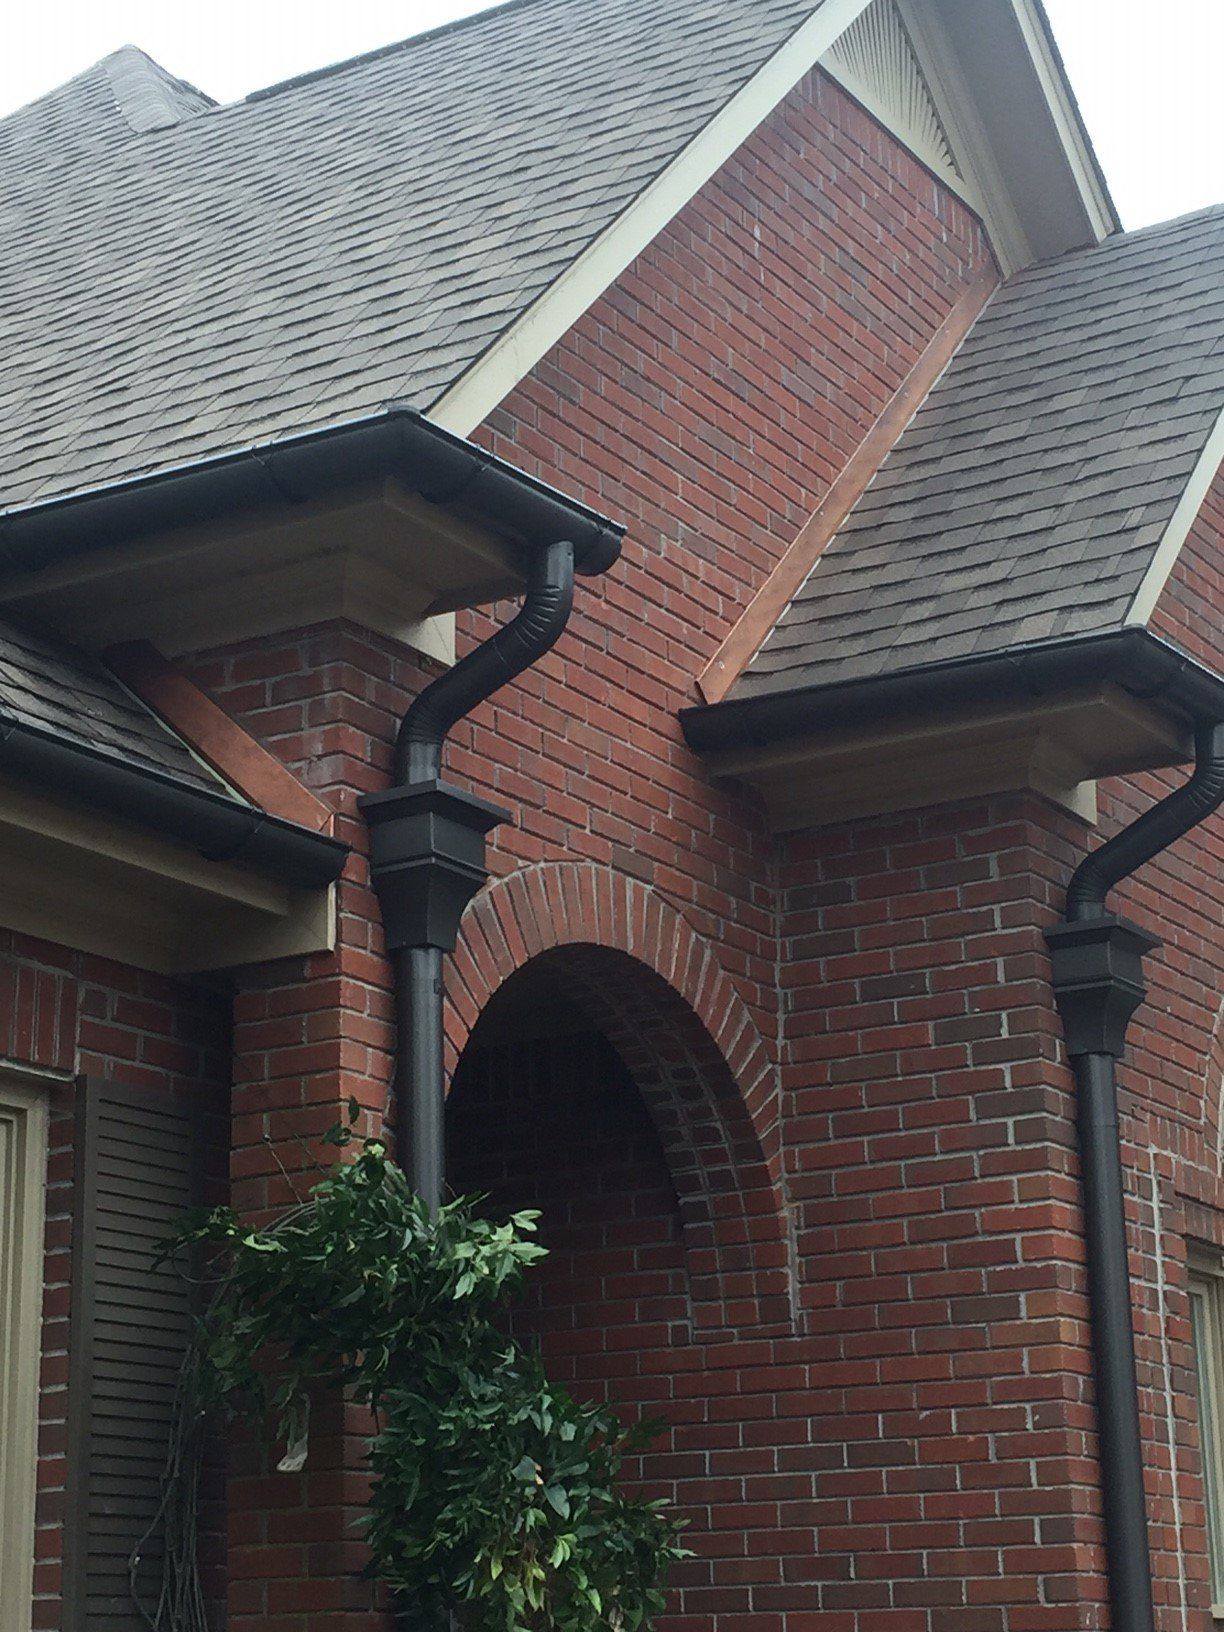 Roof with gutter work - B & B Roofing in Decatur, AL